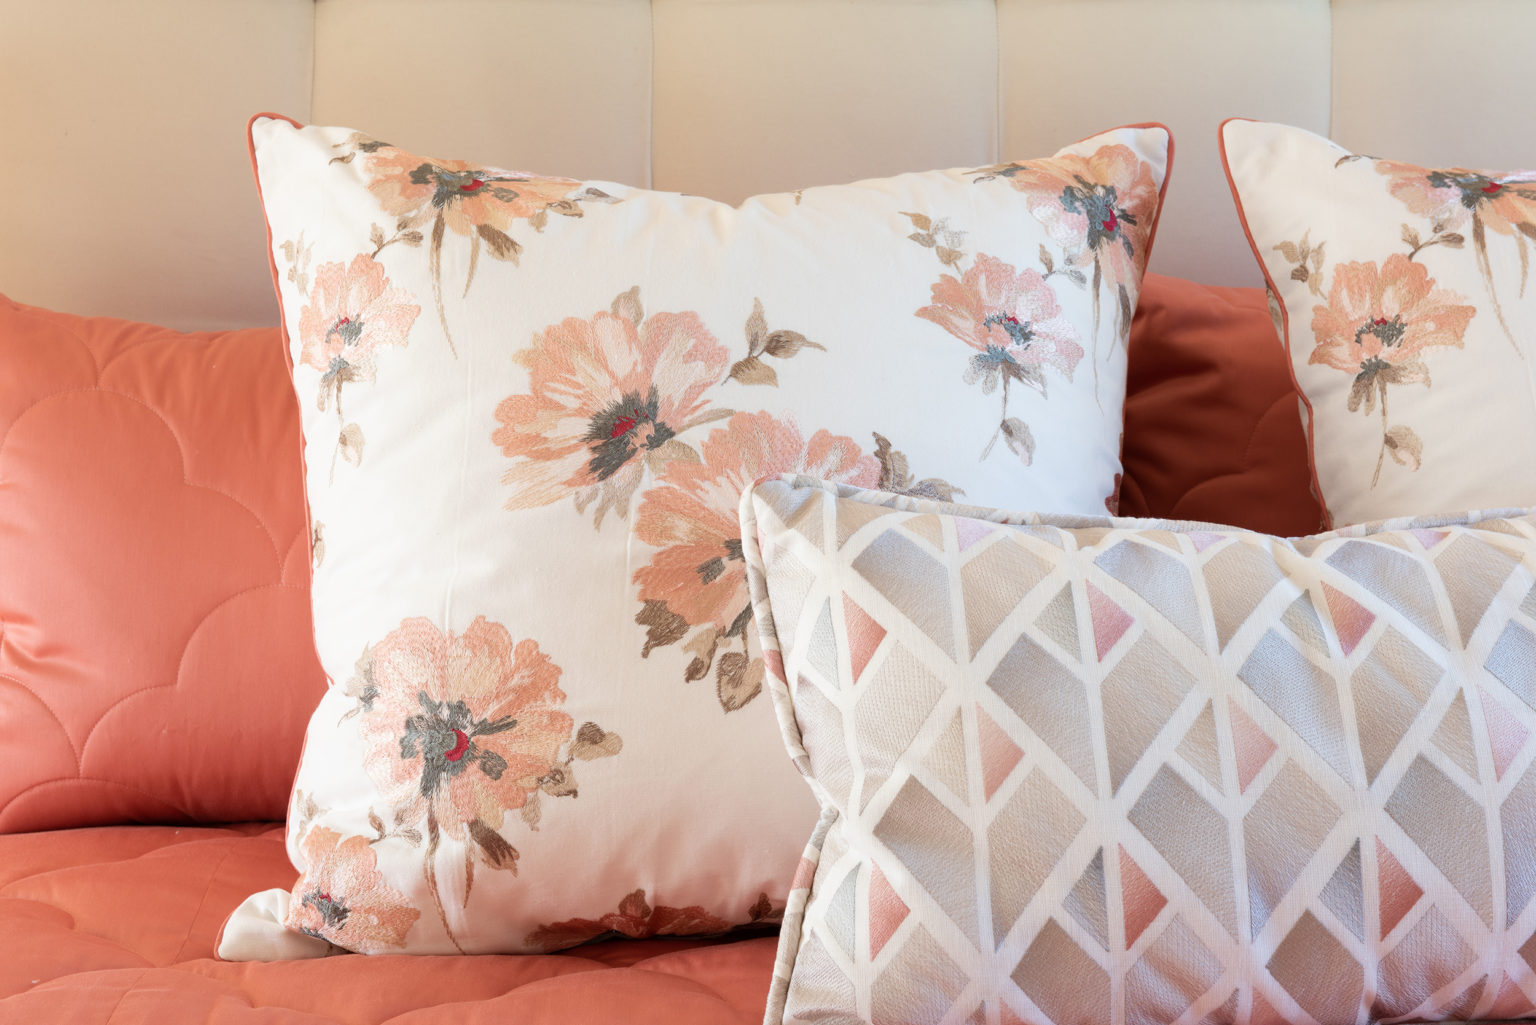 Florals Are Blooming Again in Interior Design